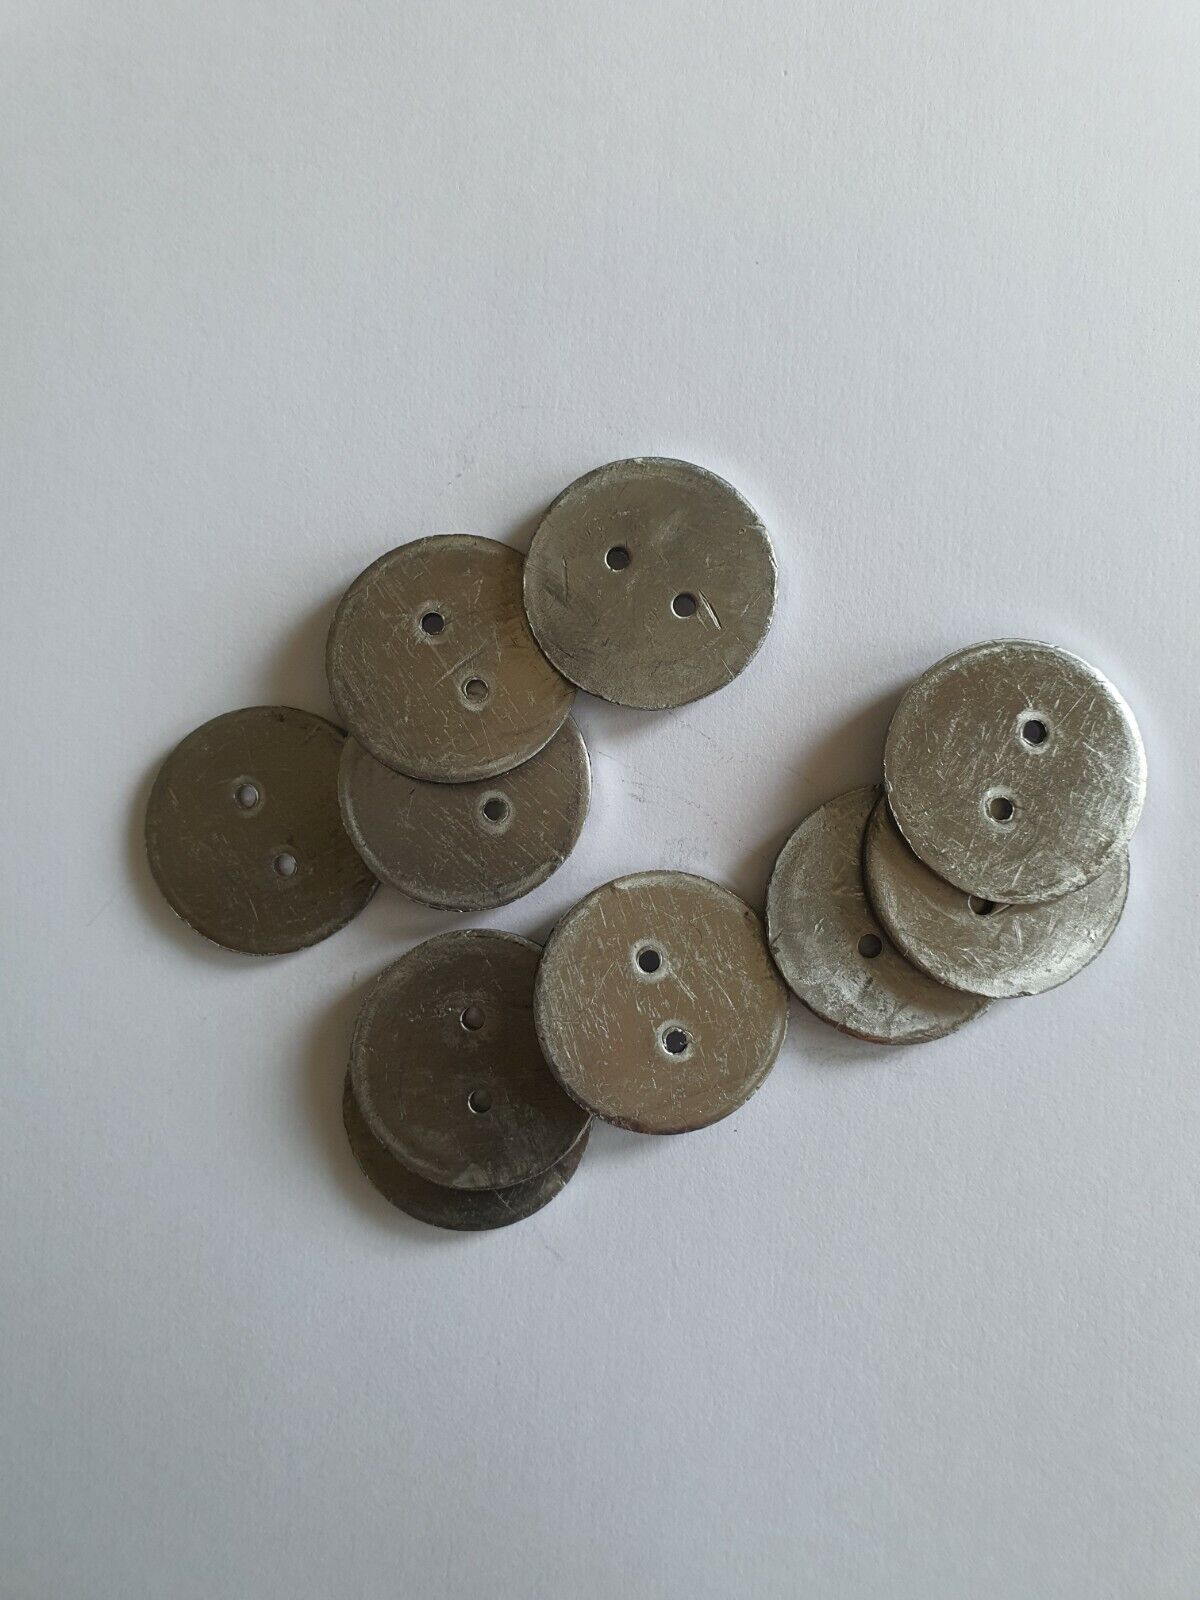 Lead penny curtains sewing weights - 13g in Weight Hem 25mm Diam